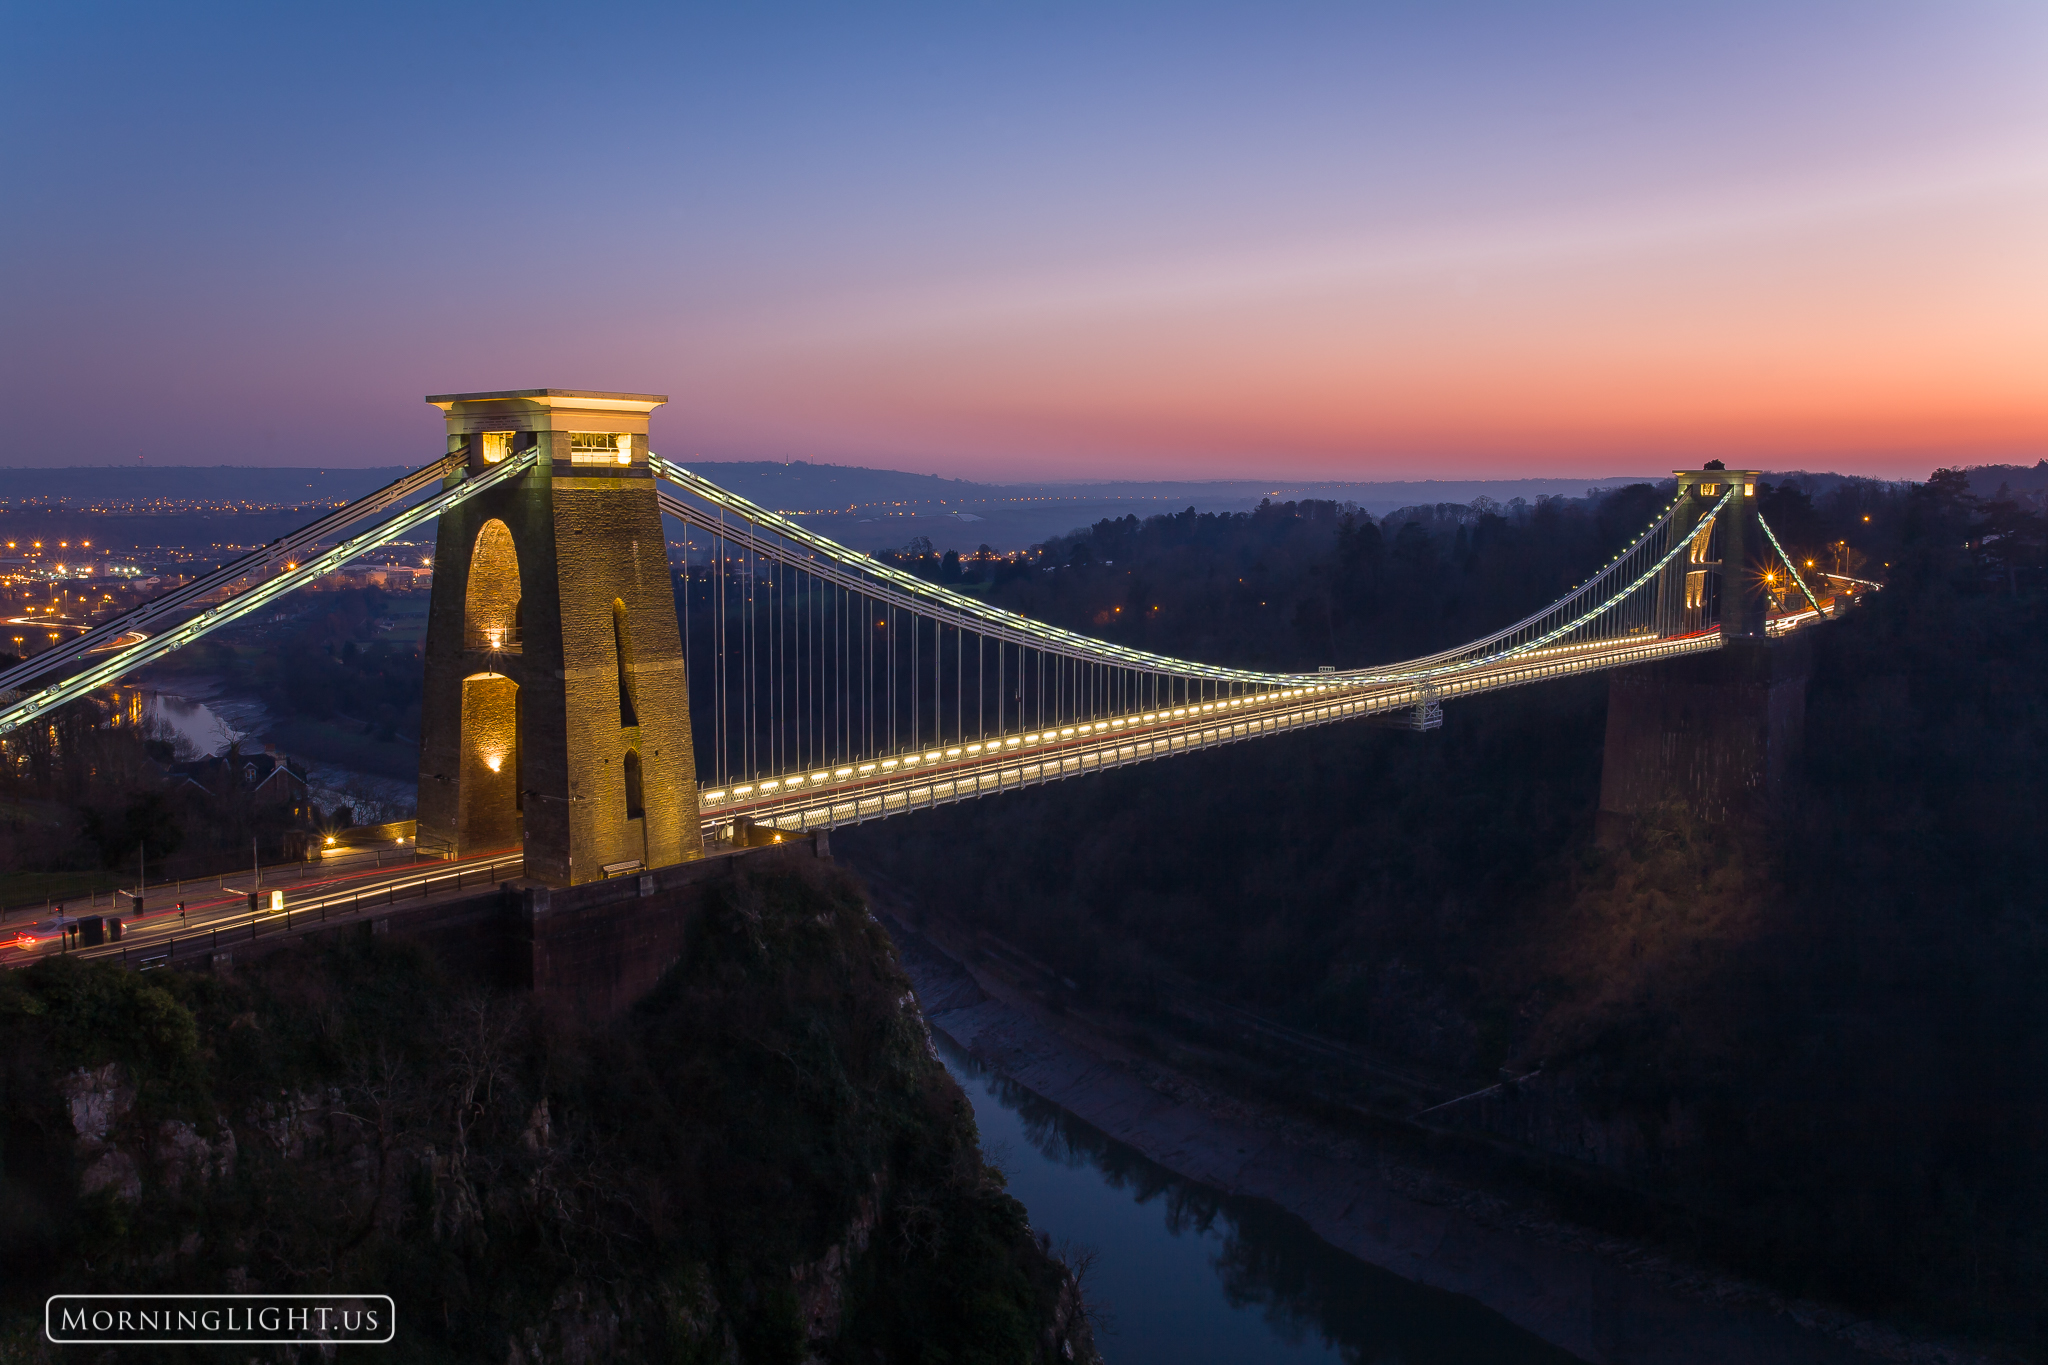 A beautiful evening on the Clifton Suspension Bridge. This bridge is one of the icons of Bristol, England.